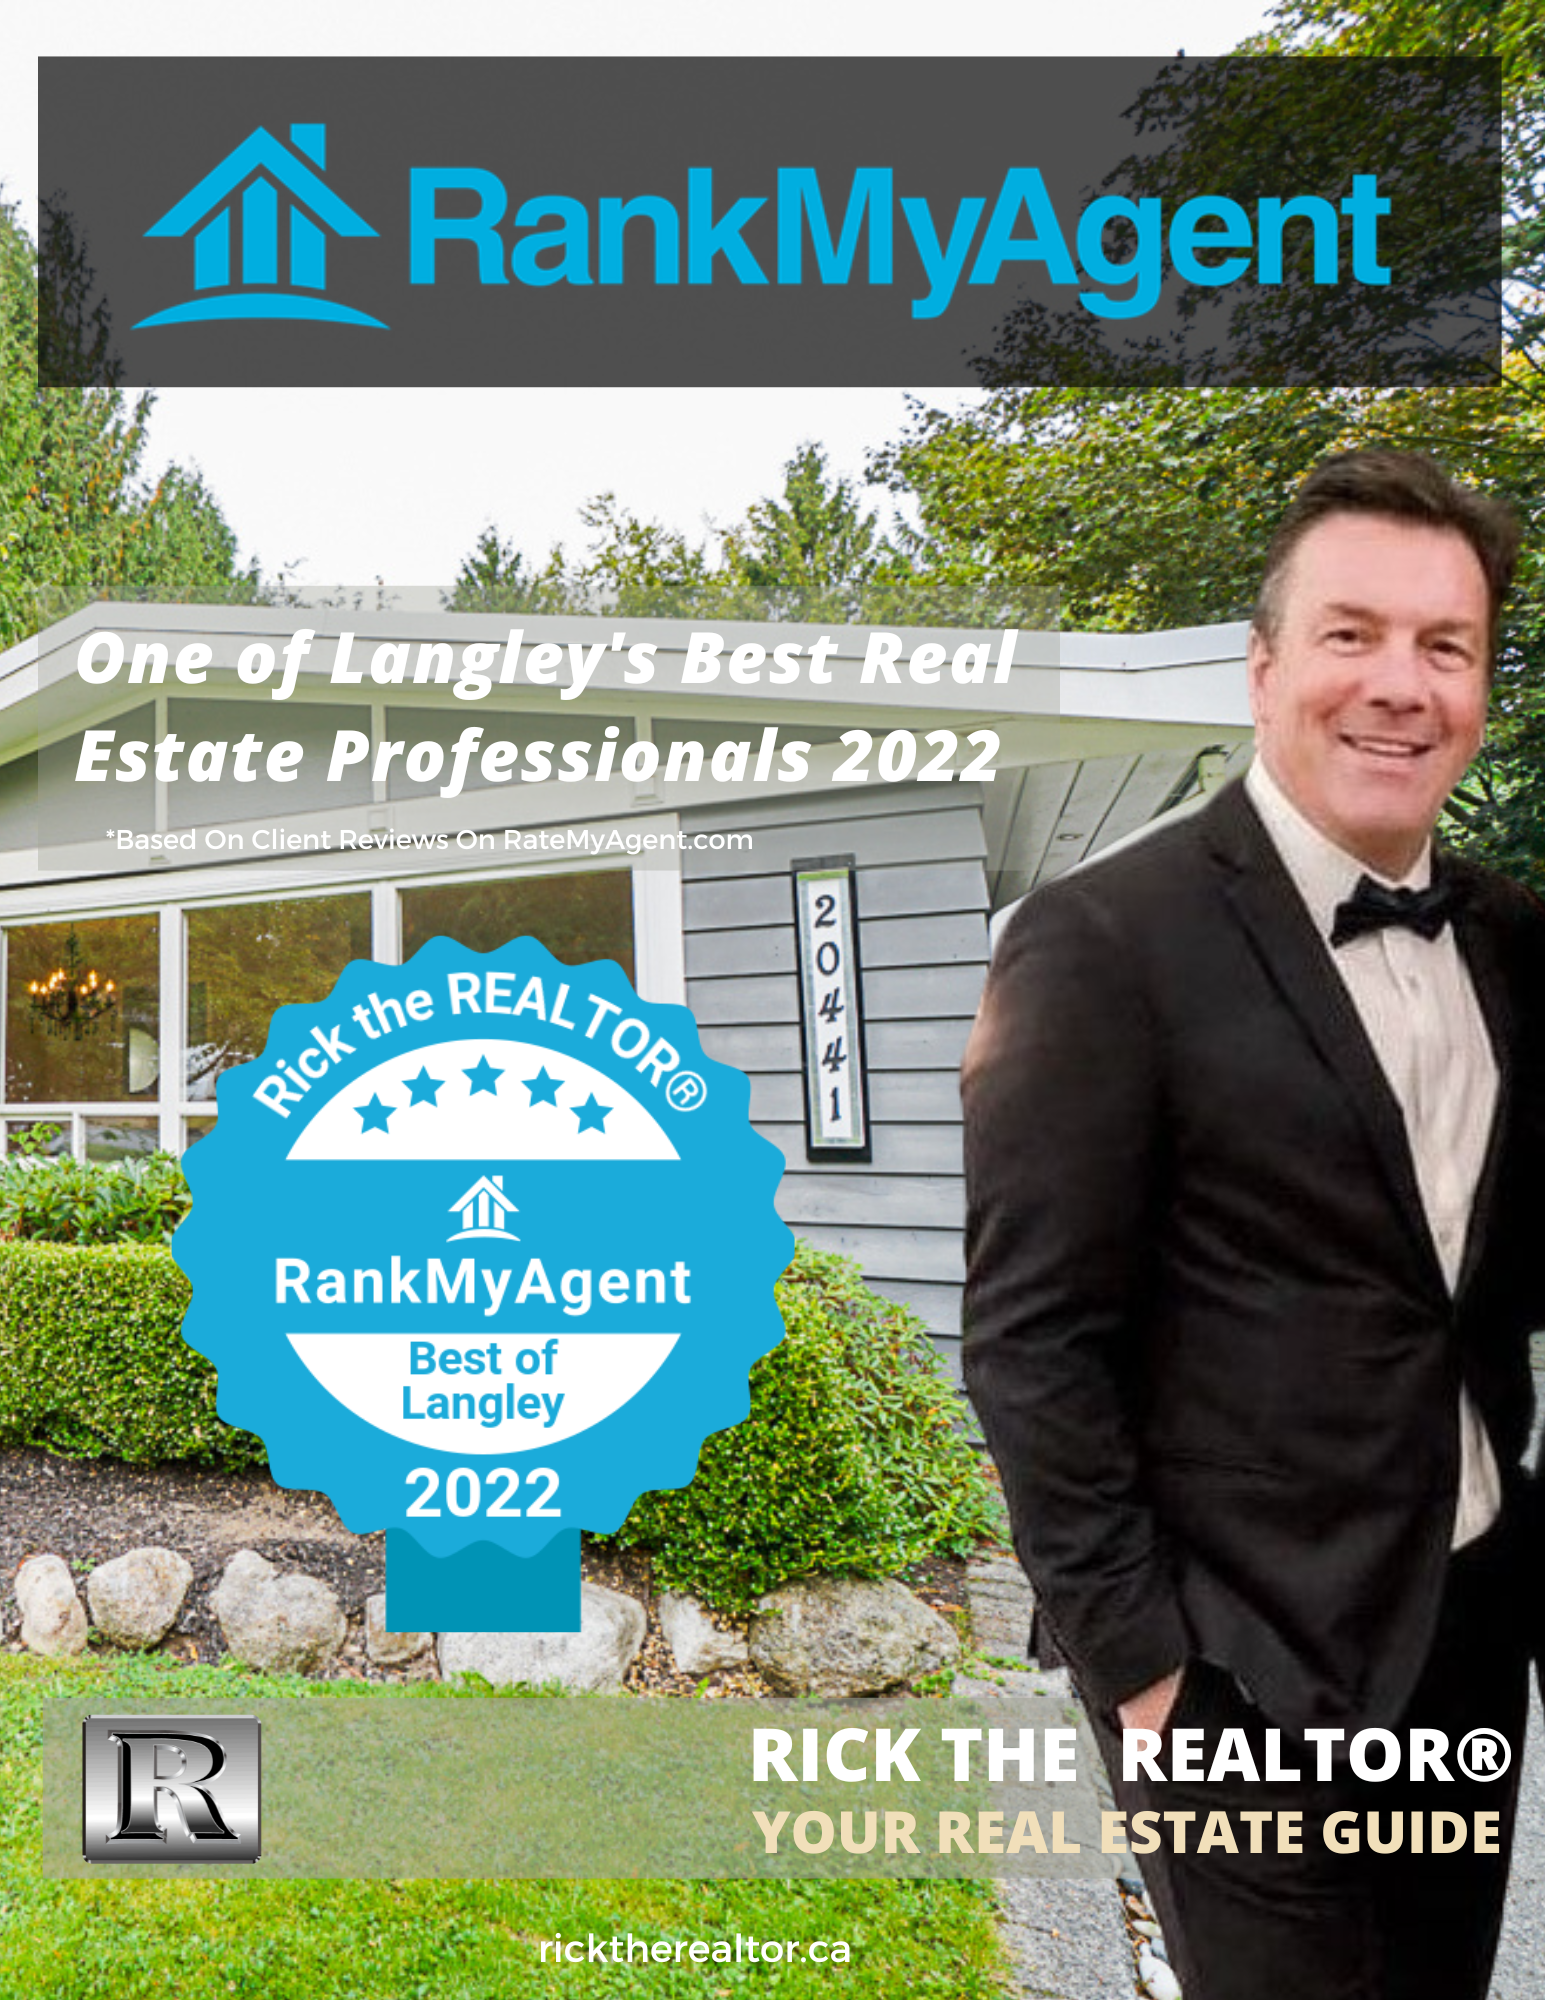 Langley REALTOR® Named One of the Best Real Estate Professionals by RankMyAgent.com